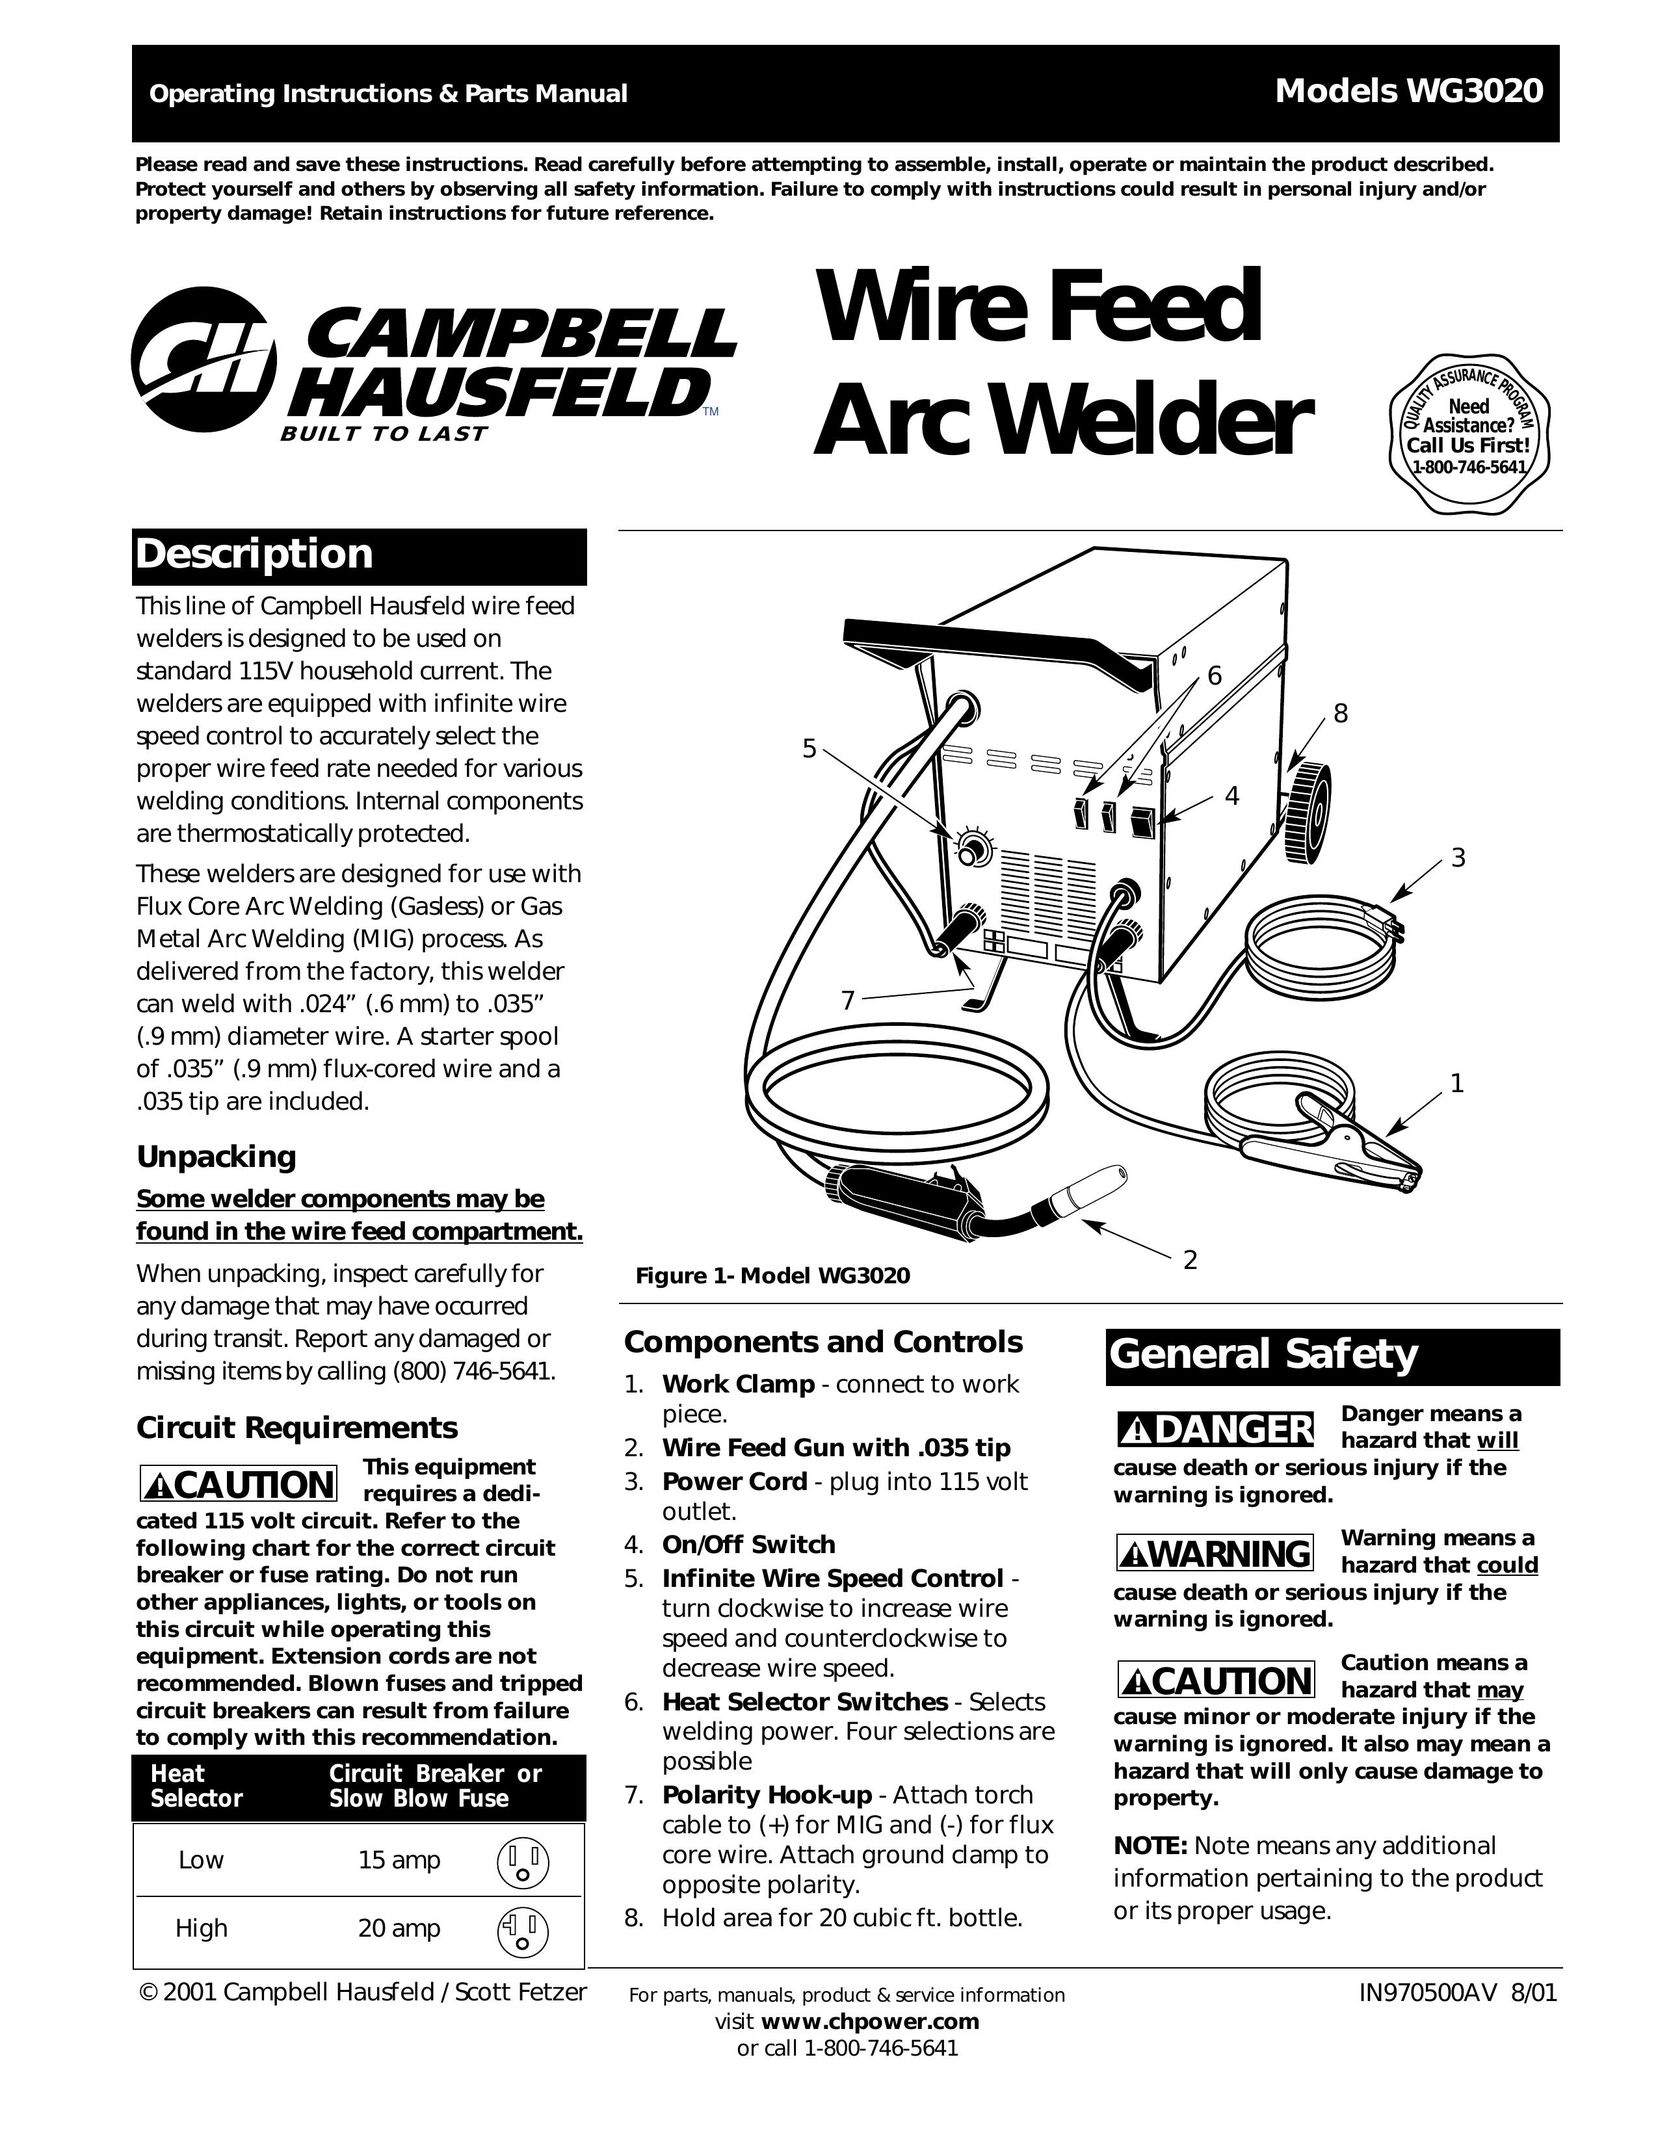 Campbell Hausfeld WG3020 Handheld Game System User Manual (Page 1)